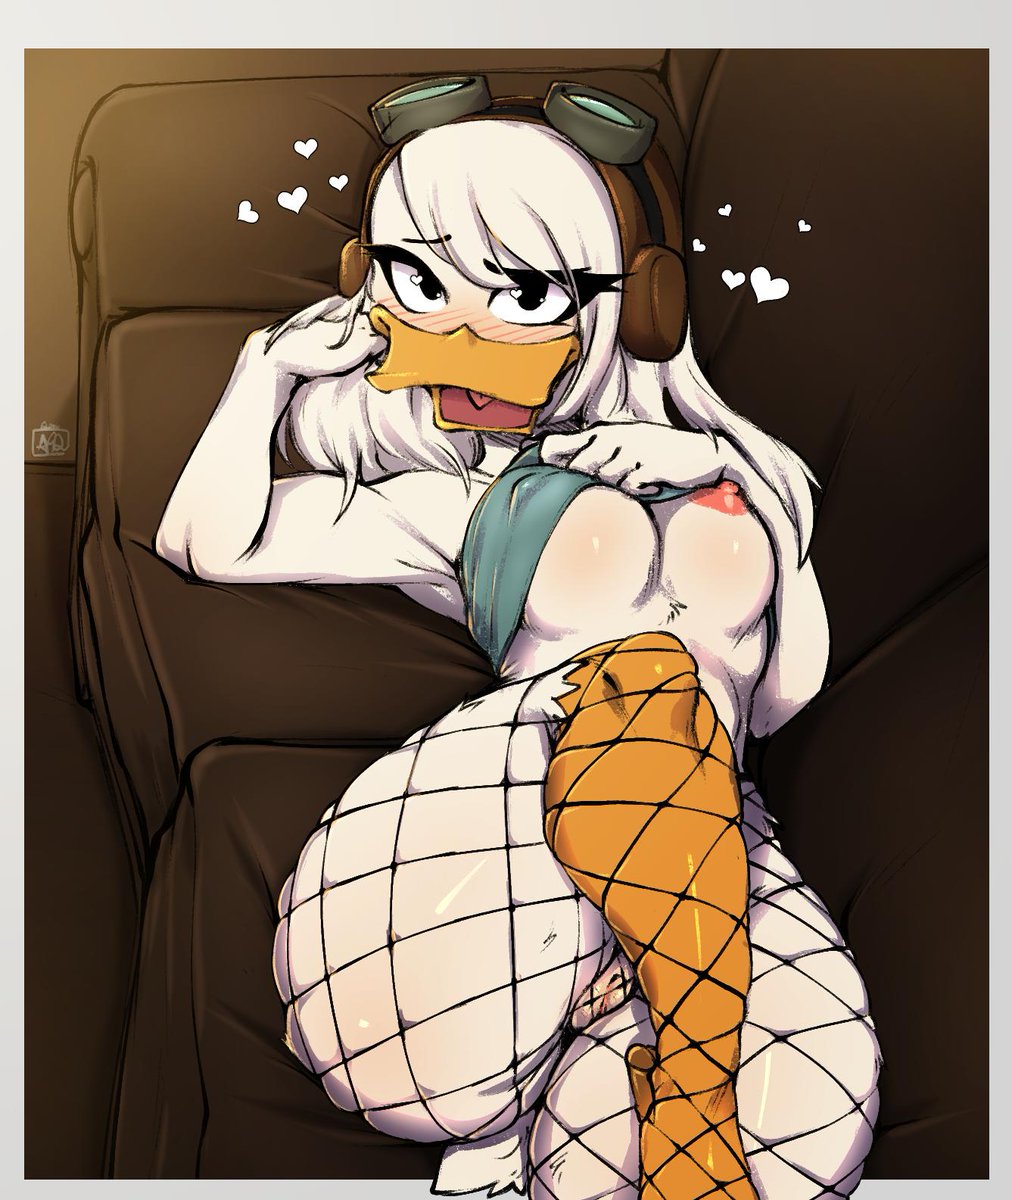 Della Duck won the poll, hope you like.